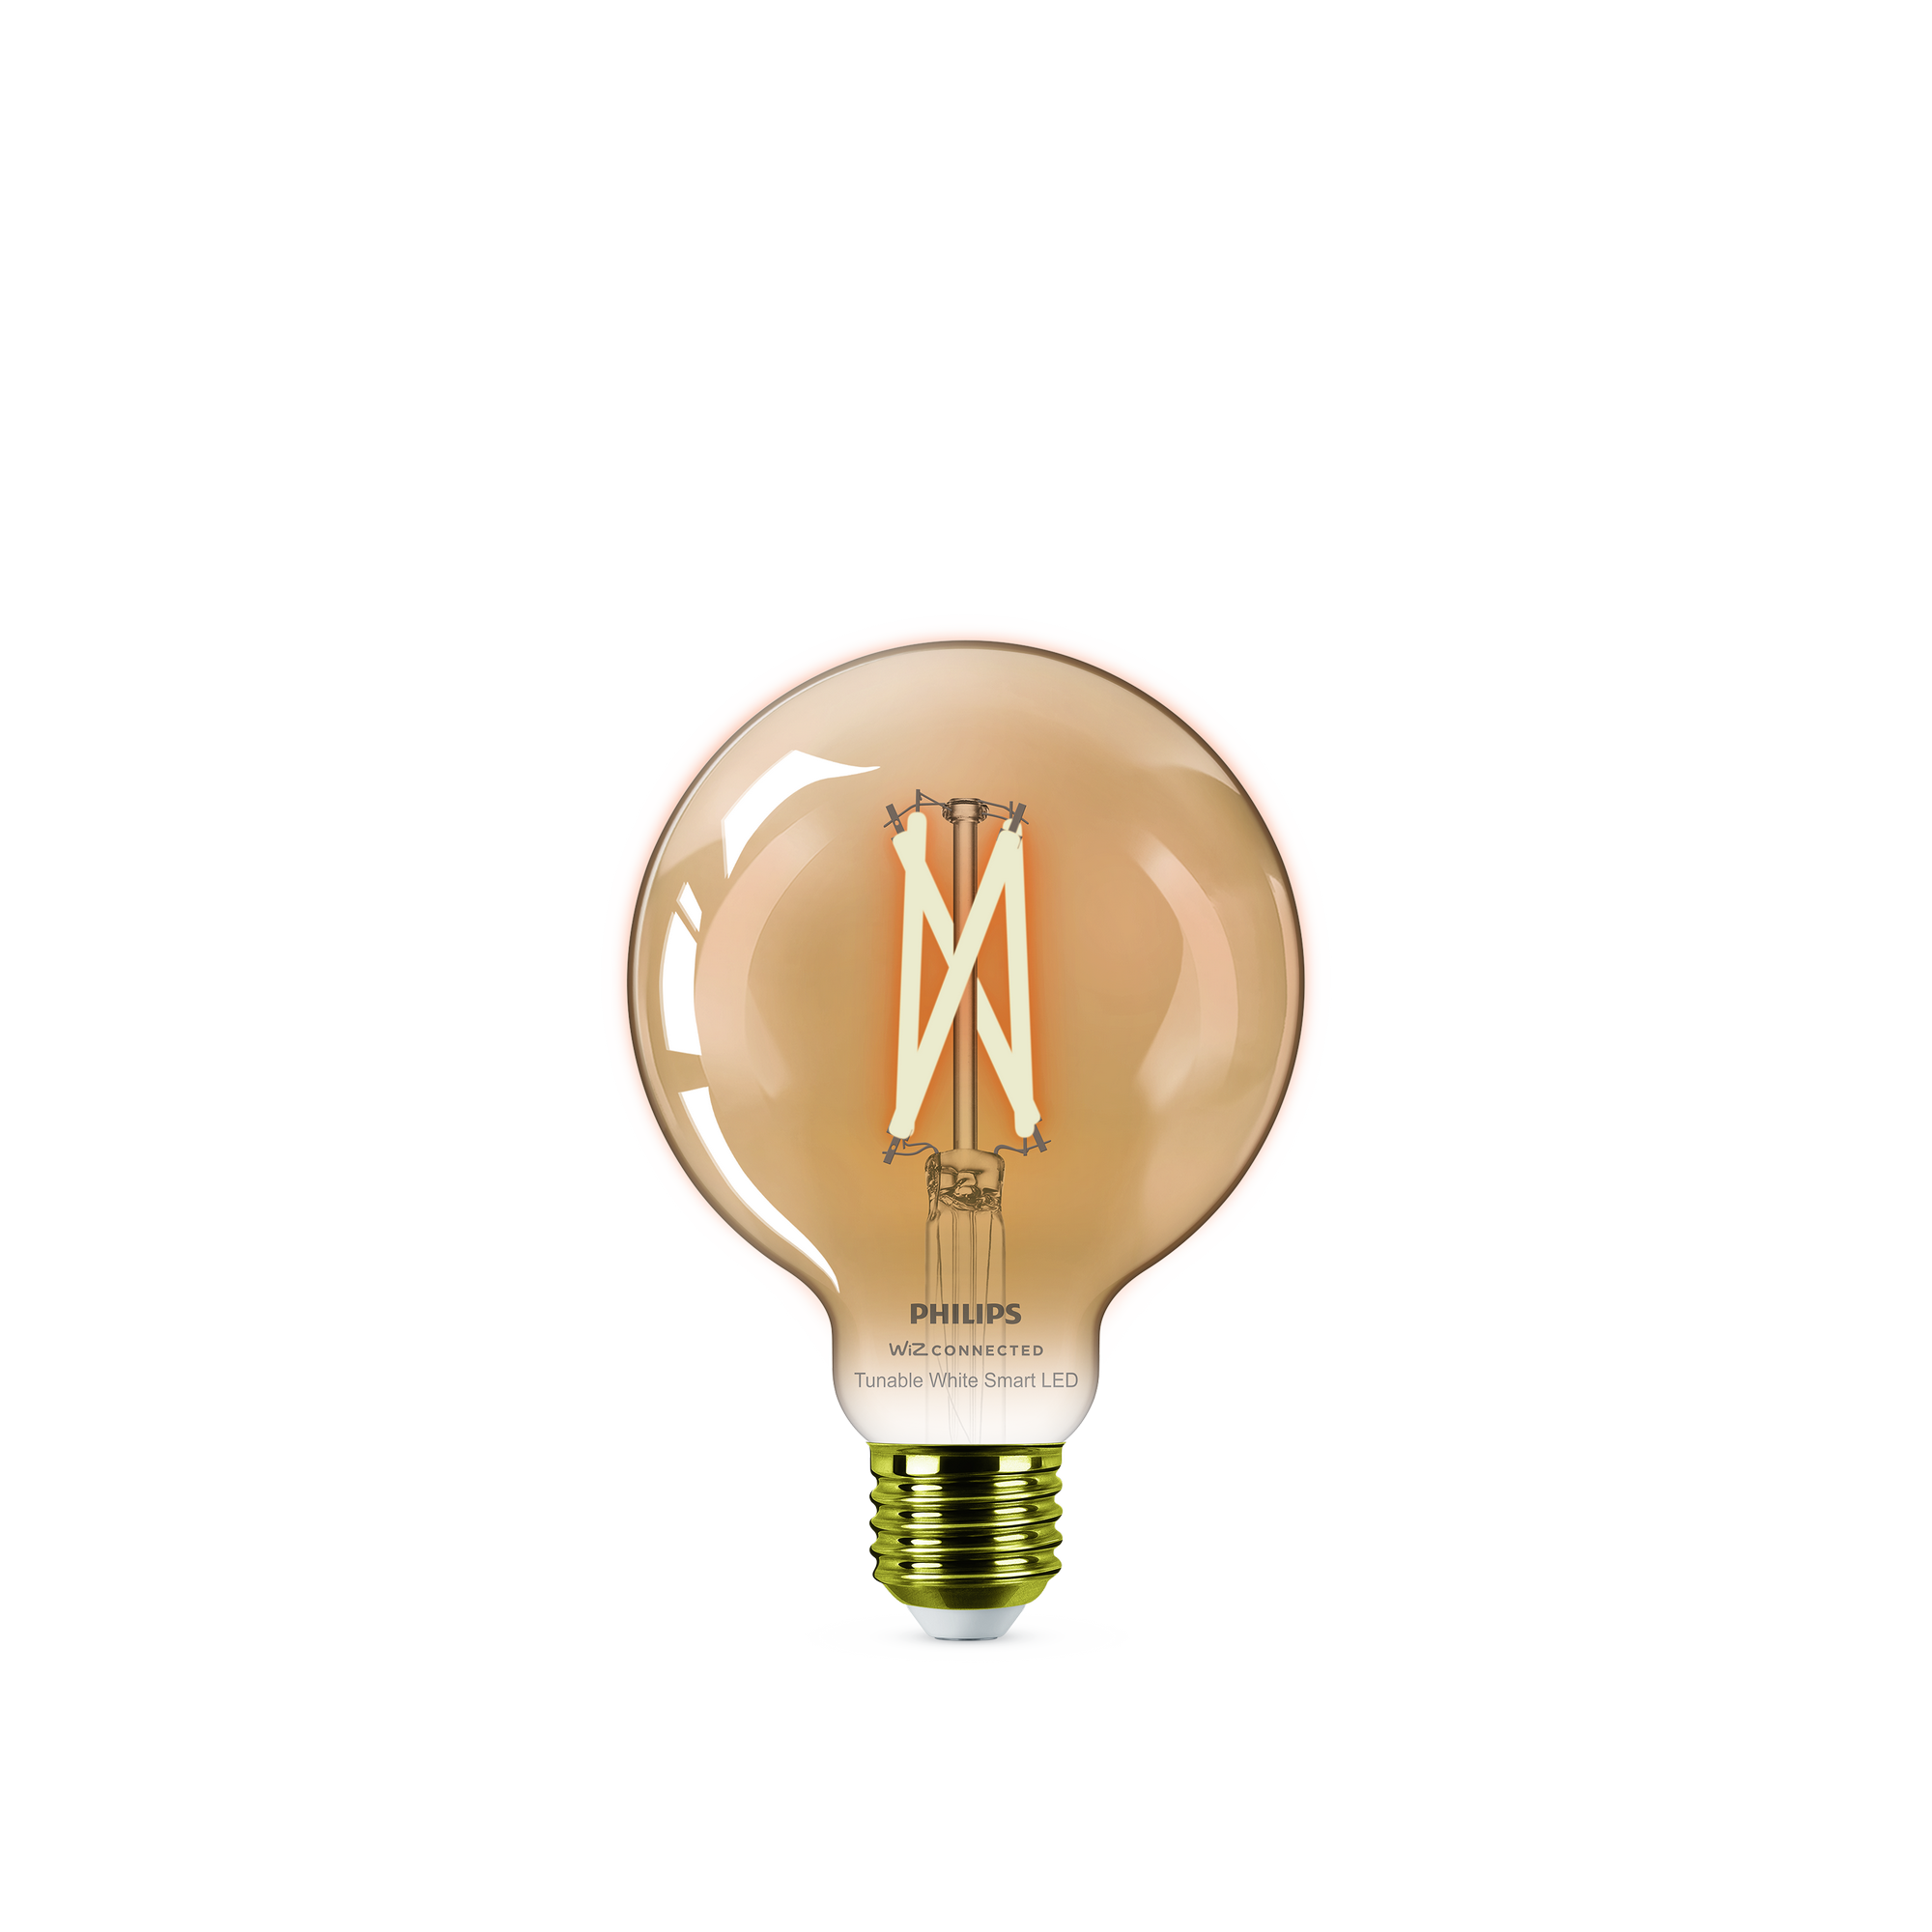 LED-Filament-Lampe 'SmartLED' 640 lm E27 Globe amber 9,5 x 14,2 cm + product picture